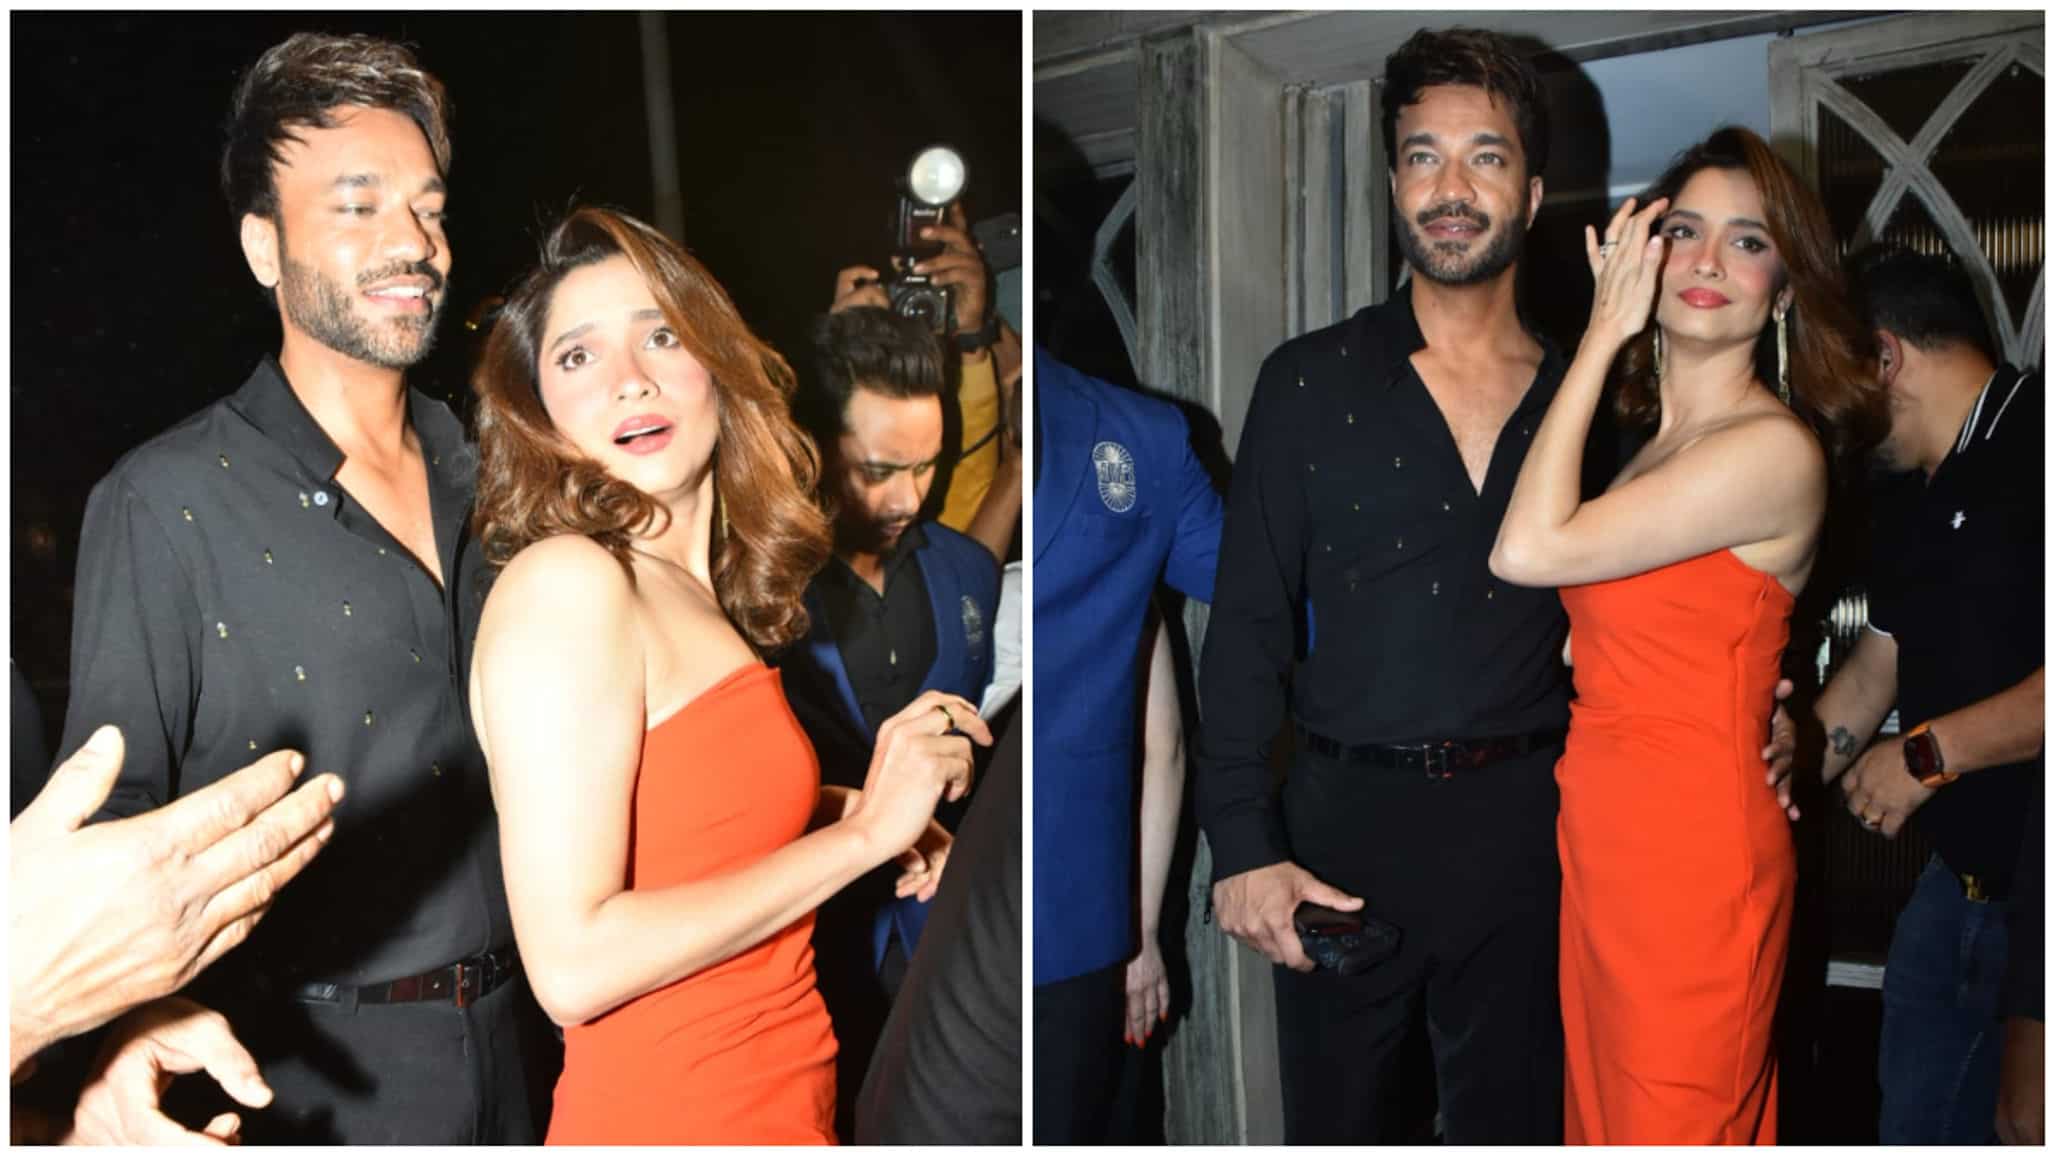 https://www.mobilemasala.com/film-gossip/Ankita-Lokhande-Vicky-Jain-step-out-for-a-dinner-date-in-Mumbai-amid-separation-rumours-View-PICS-i211667